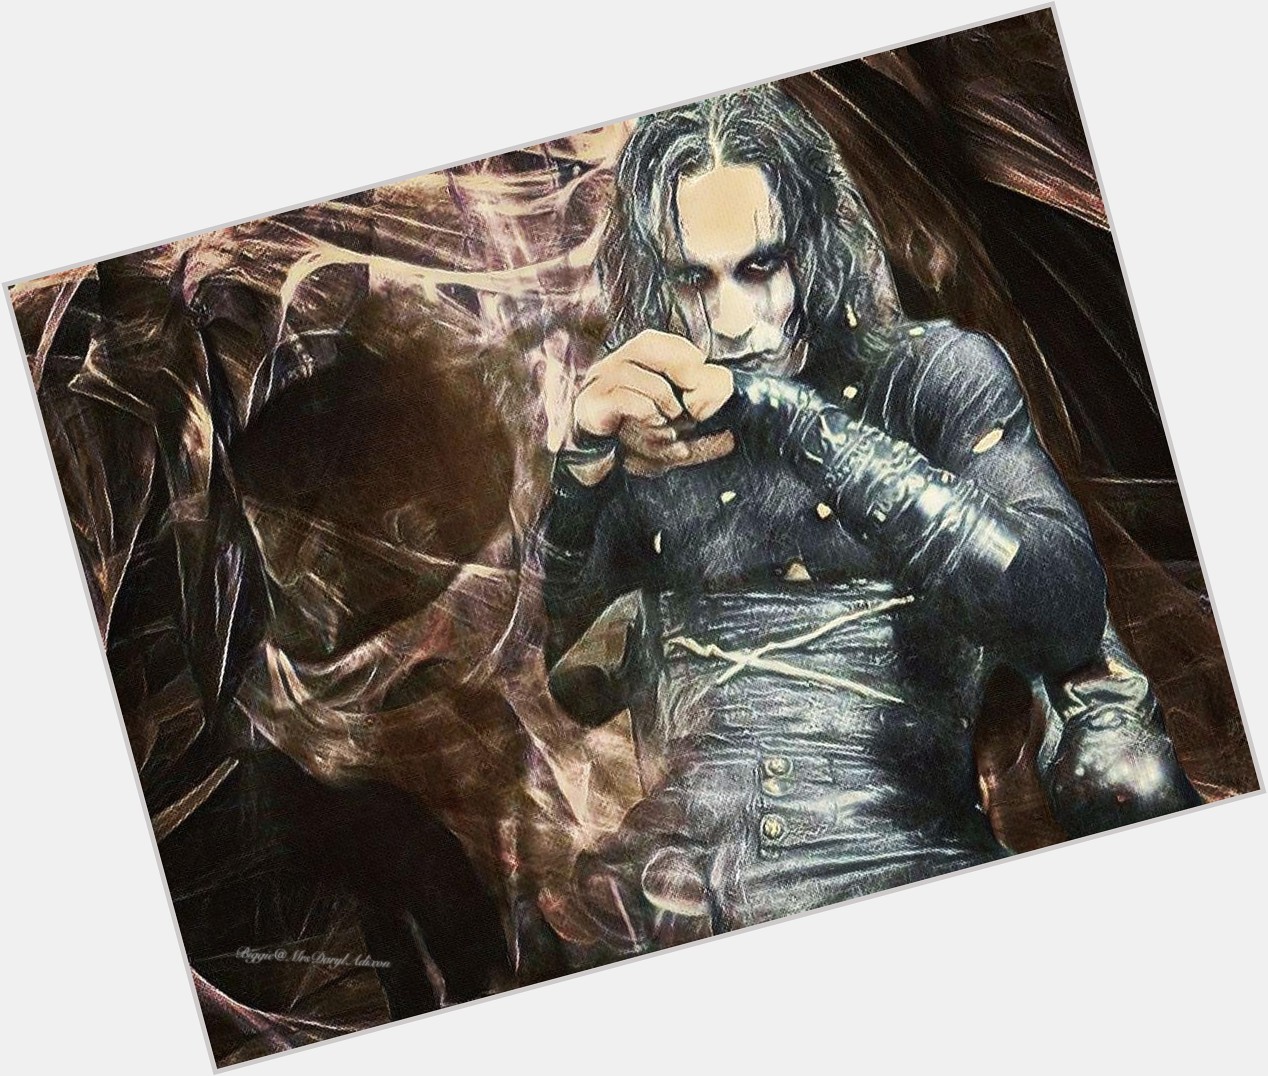  Happy Birthday Brandon Lee 
You played a mesmerising role in The Crow 